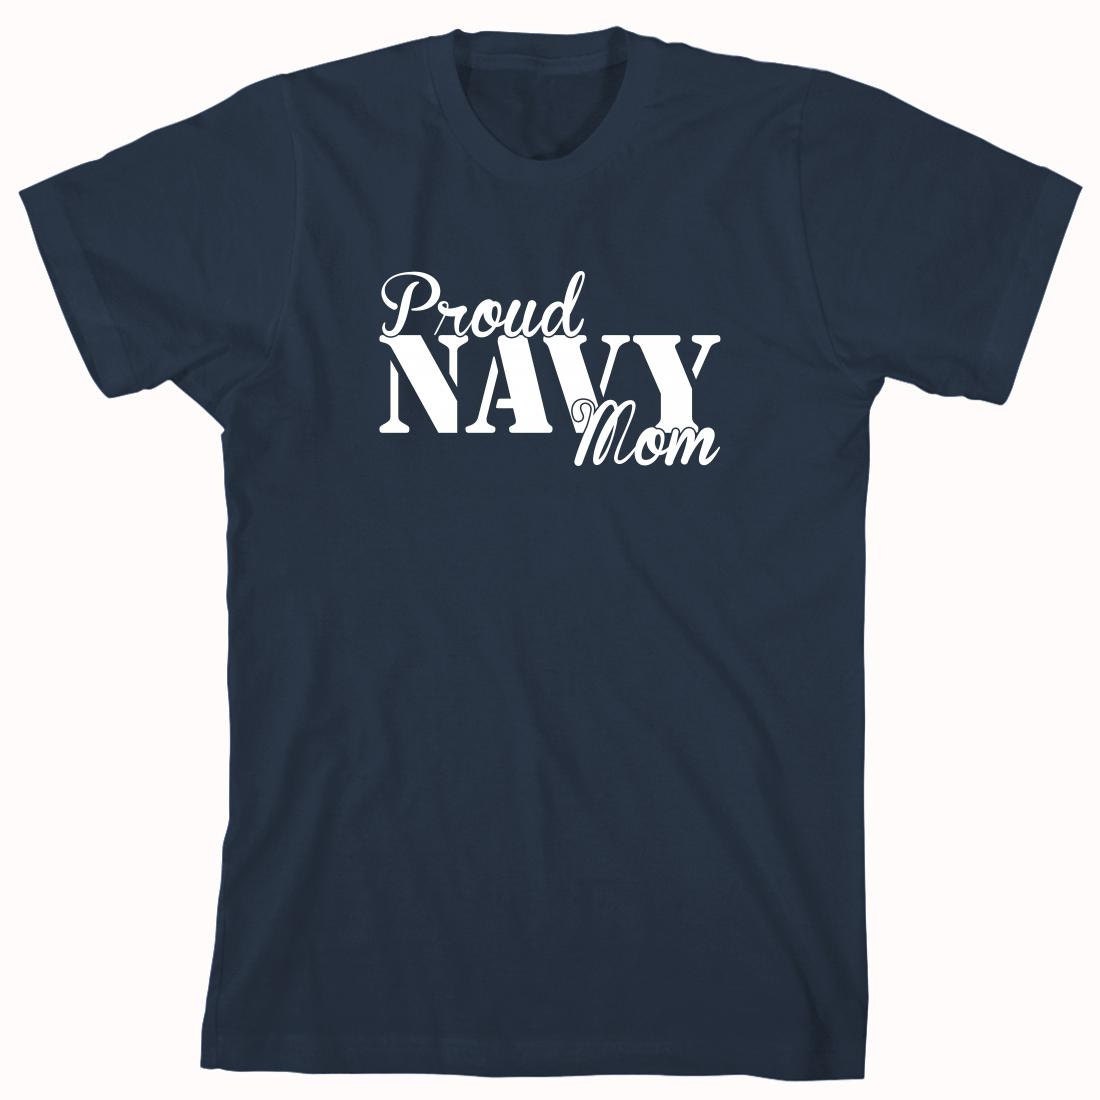 Proud Navy Mom Shirt seabee gift idea for mom mother's